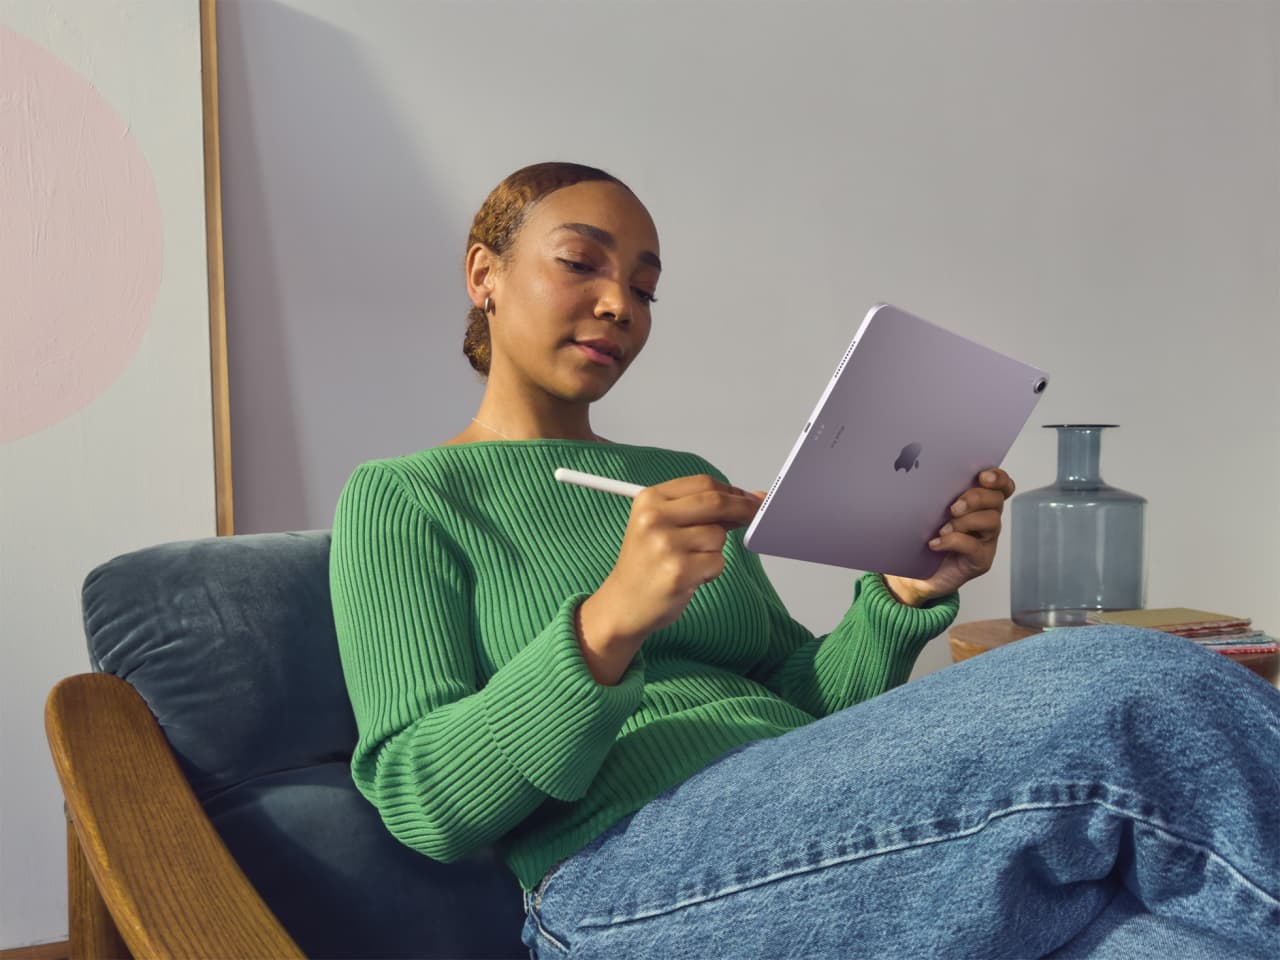 Apple refreshes iPad Air and iPad Pro lineups — while talking up AI